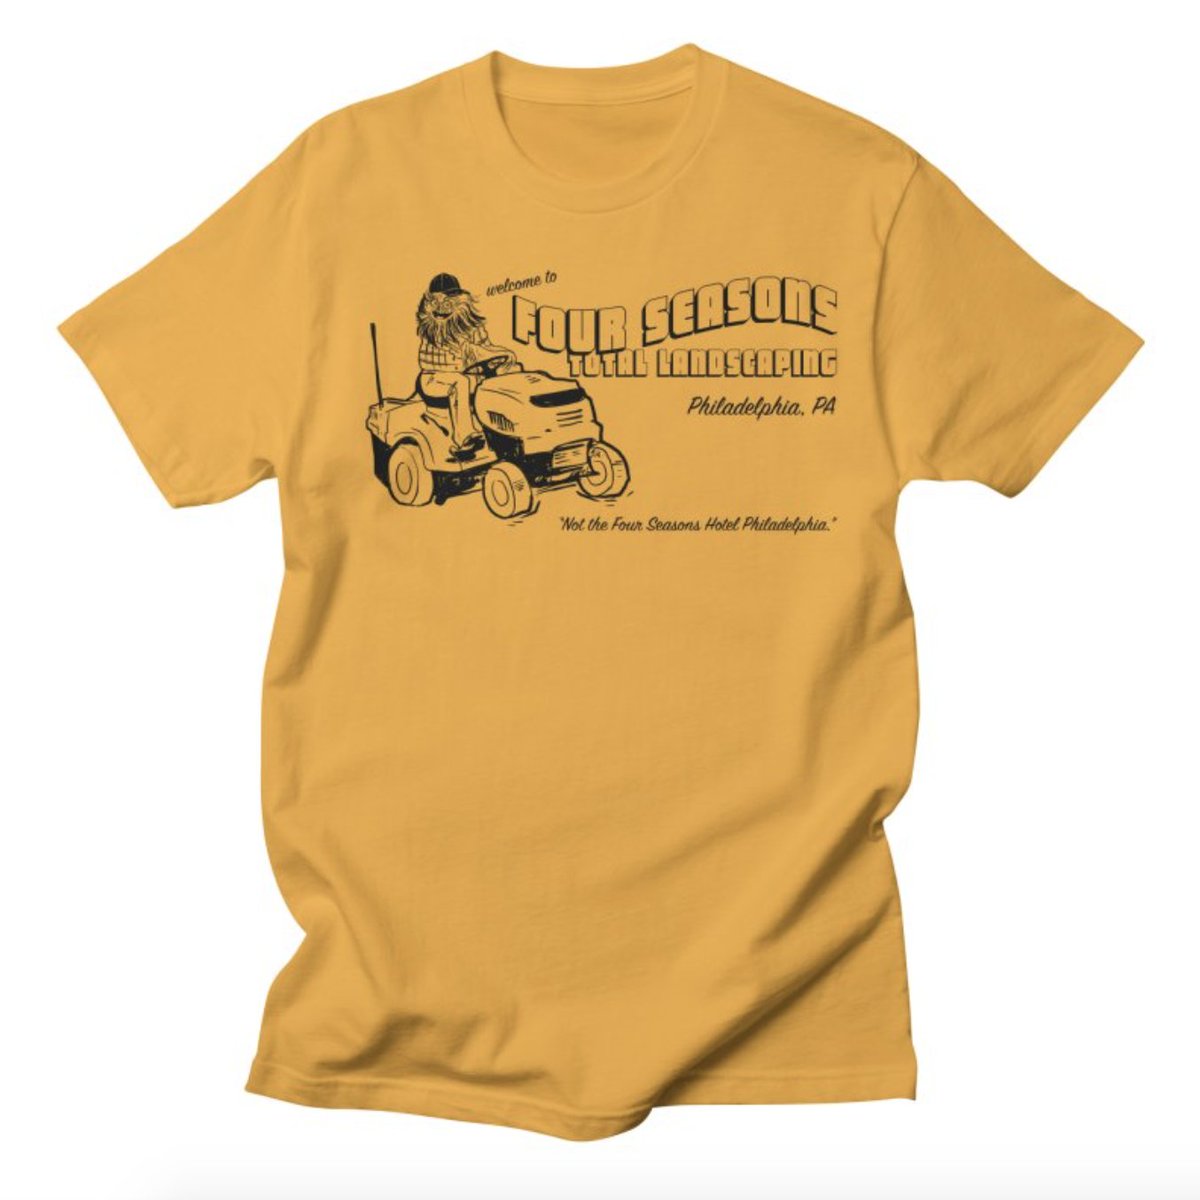 SHIRTS ARE BACK! I will be working directly with Threadless to get money directly to voting charities(the ones mentioned earlier)!! However, I am still refusing to offer shirts on black, out of respect for the beautiful oranges of Gritty's fur. Thank you.  https://shopclass.threadless.com/designs/four-seasons-total-landscaping/